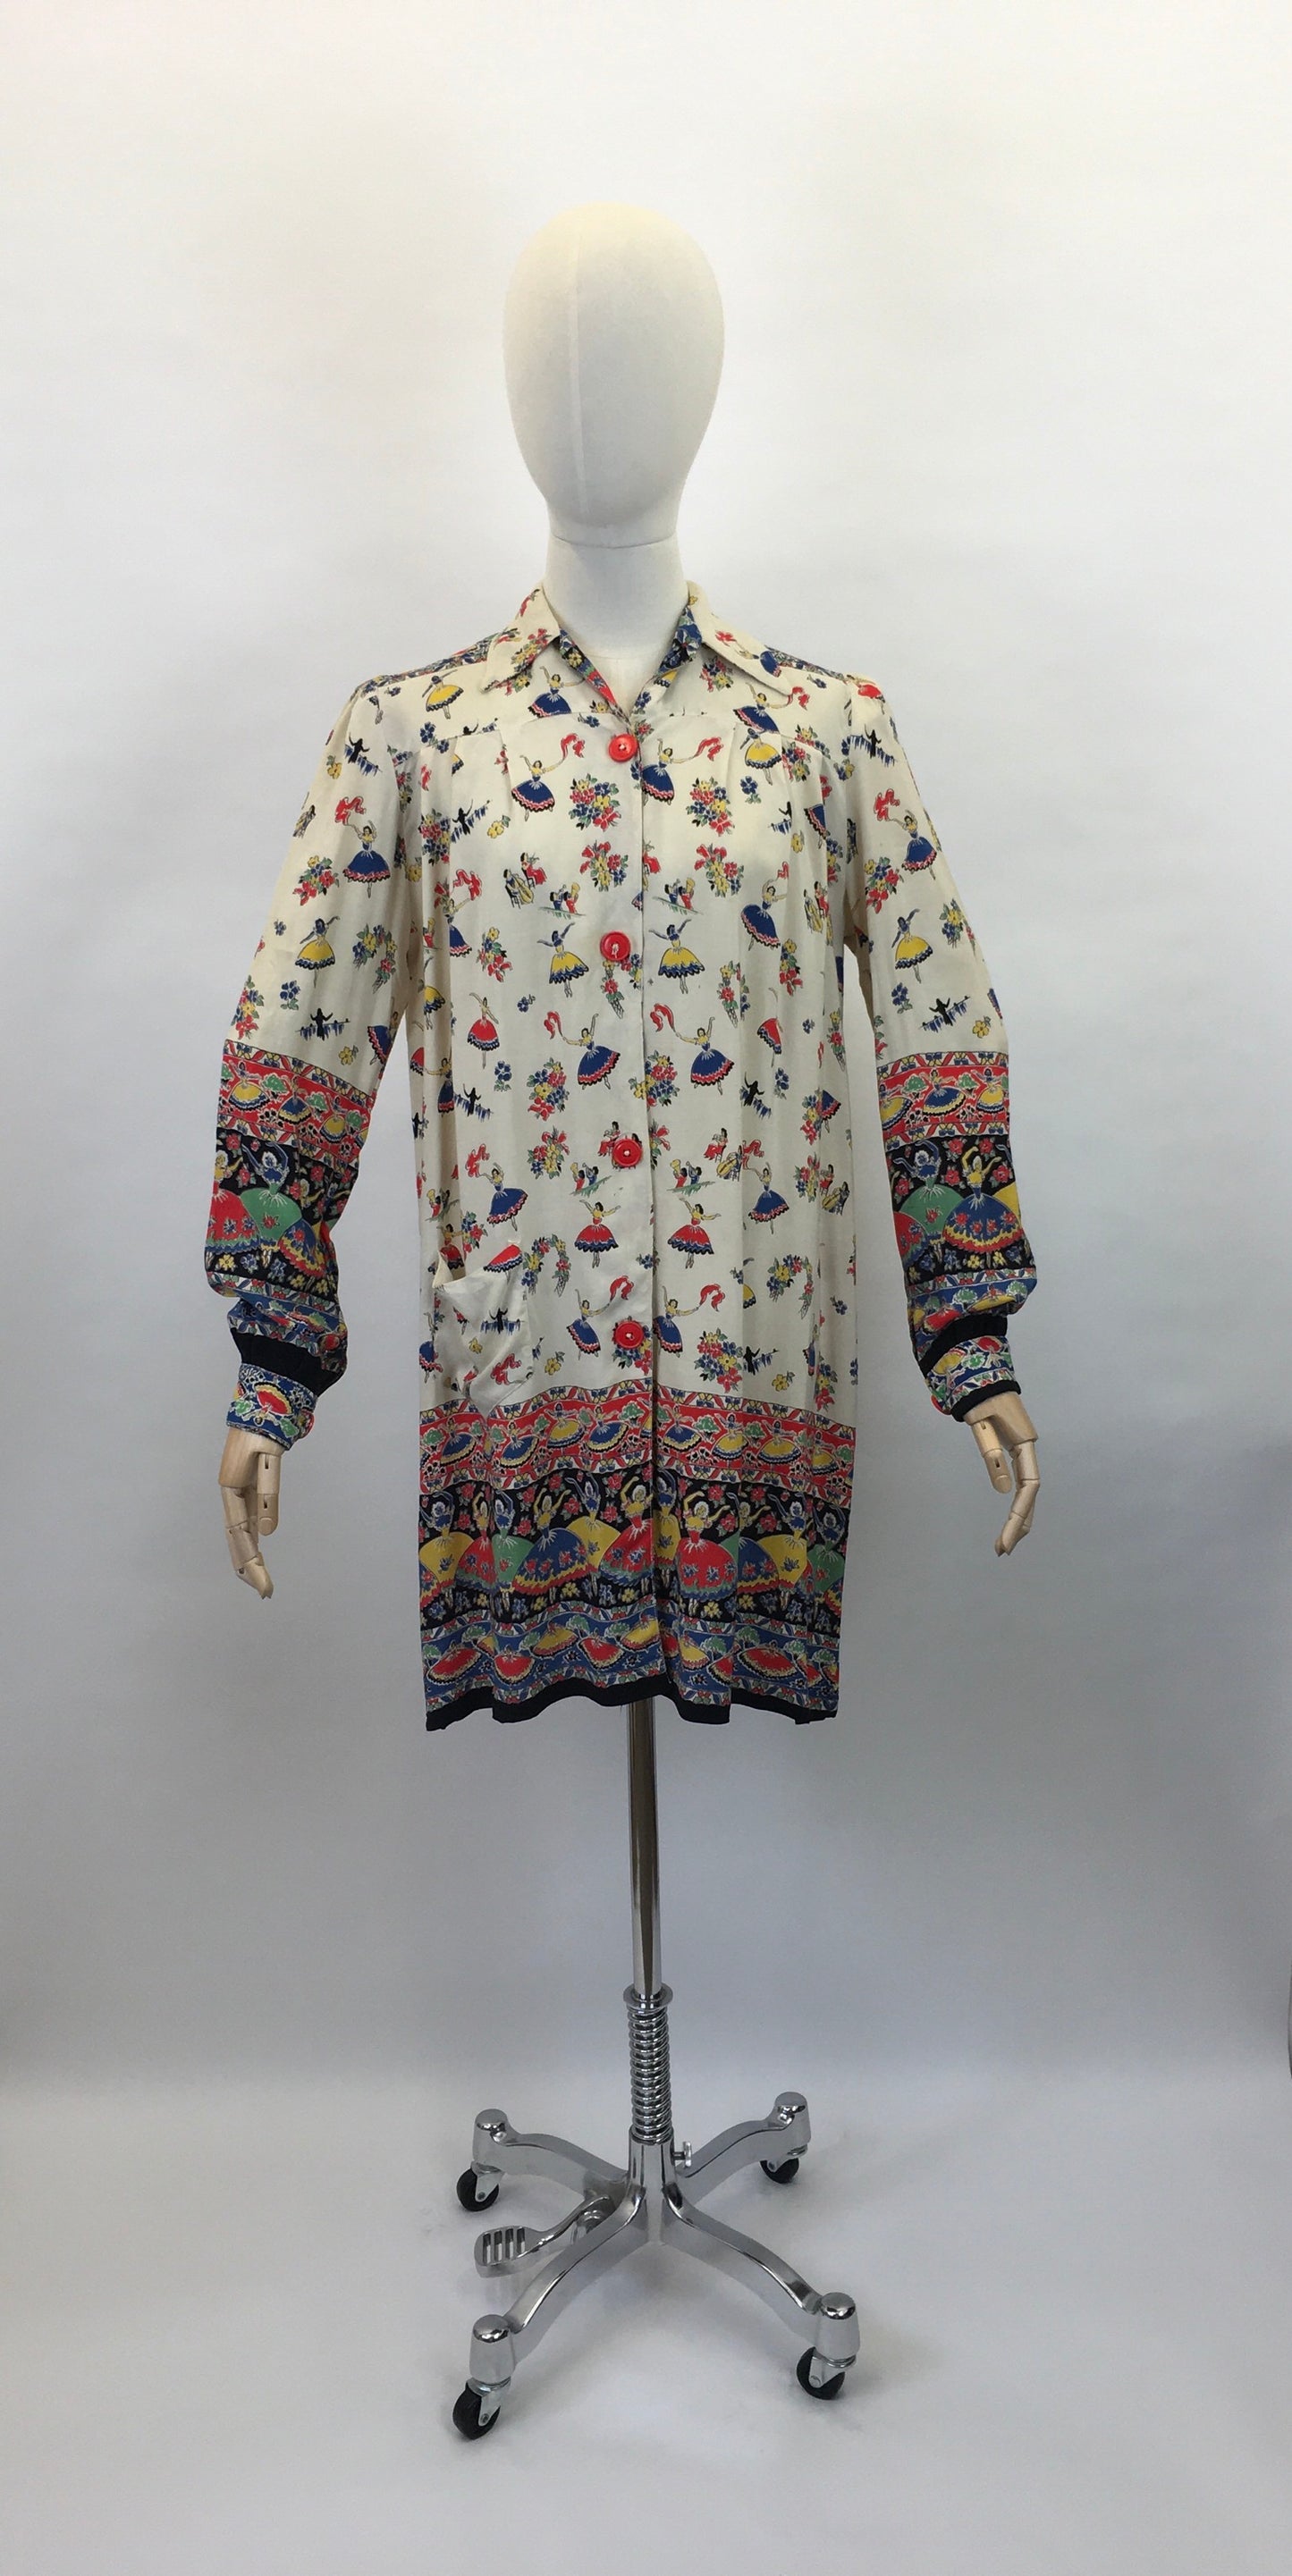 Original 1940s CC41 St. Michael Novelty Print Smock - In Fabulous Dancer Print in Bright Primary Colours